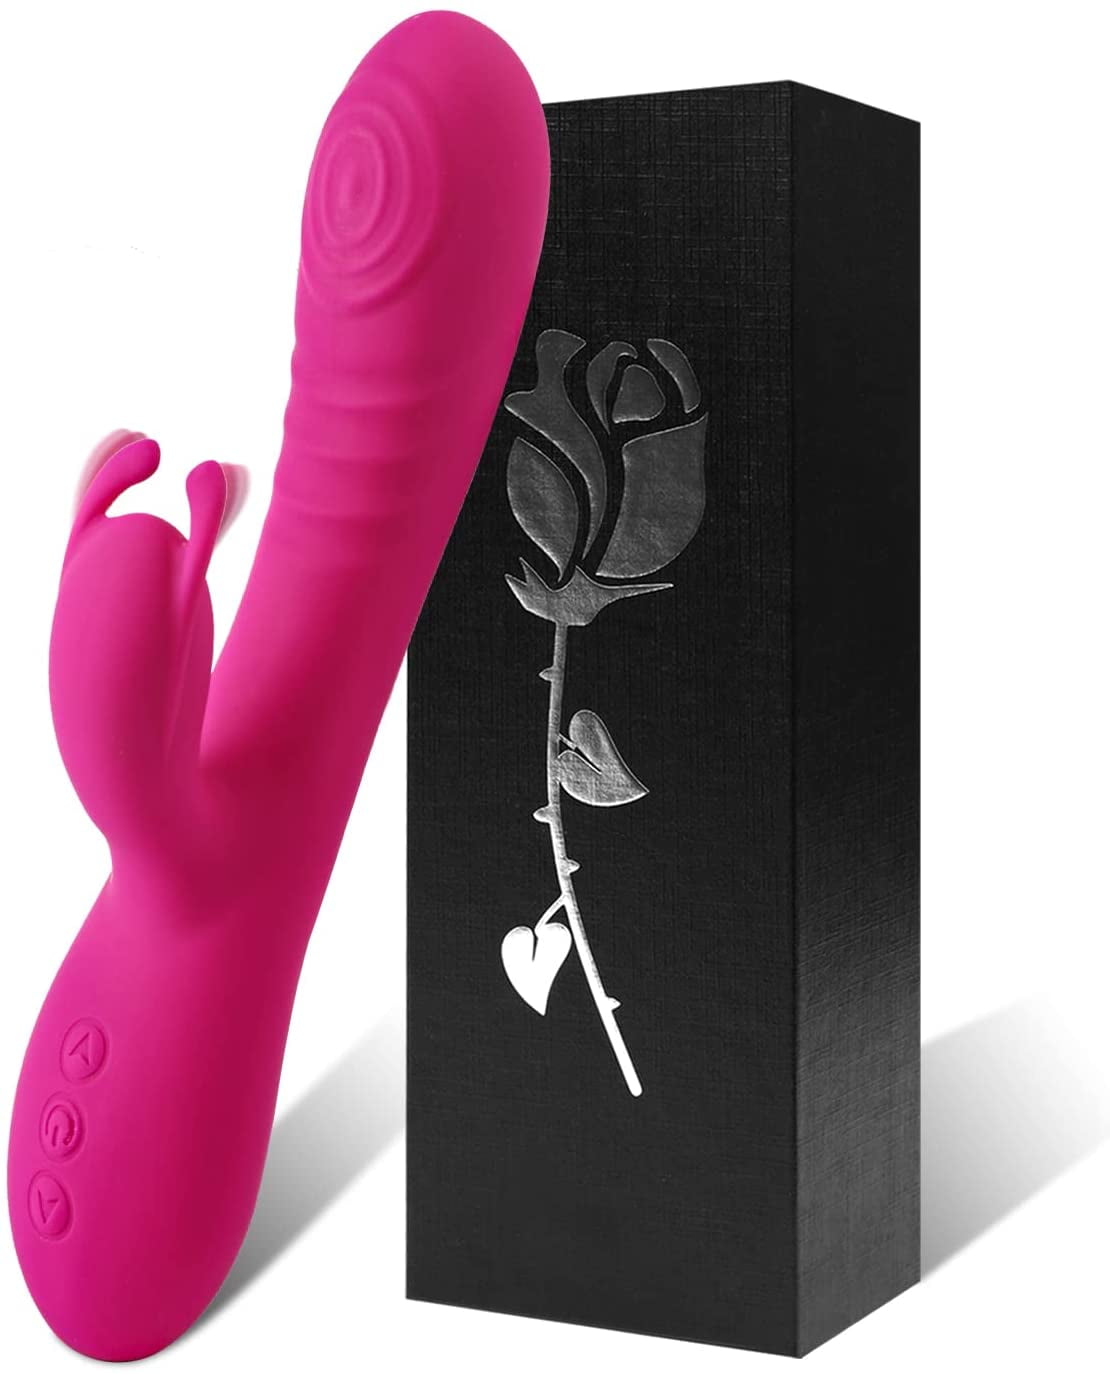 Imimi Rose Flap Rabbit Vibrator Clitoral Nipple Vibrator Sex Toy for Couples Women with Powerful Vibration Patterns (Pink) picture pic